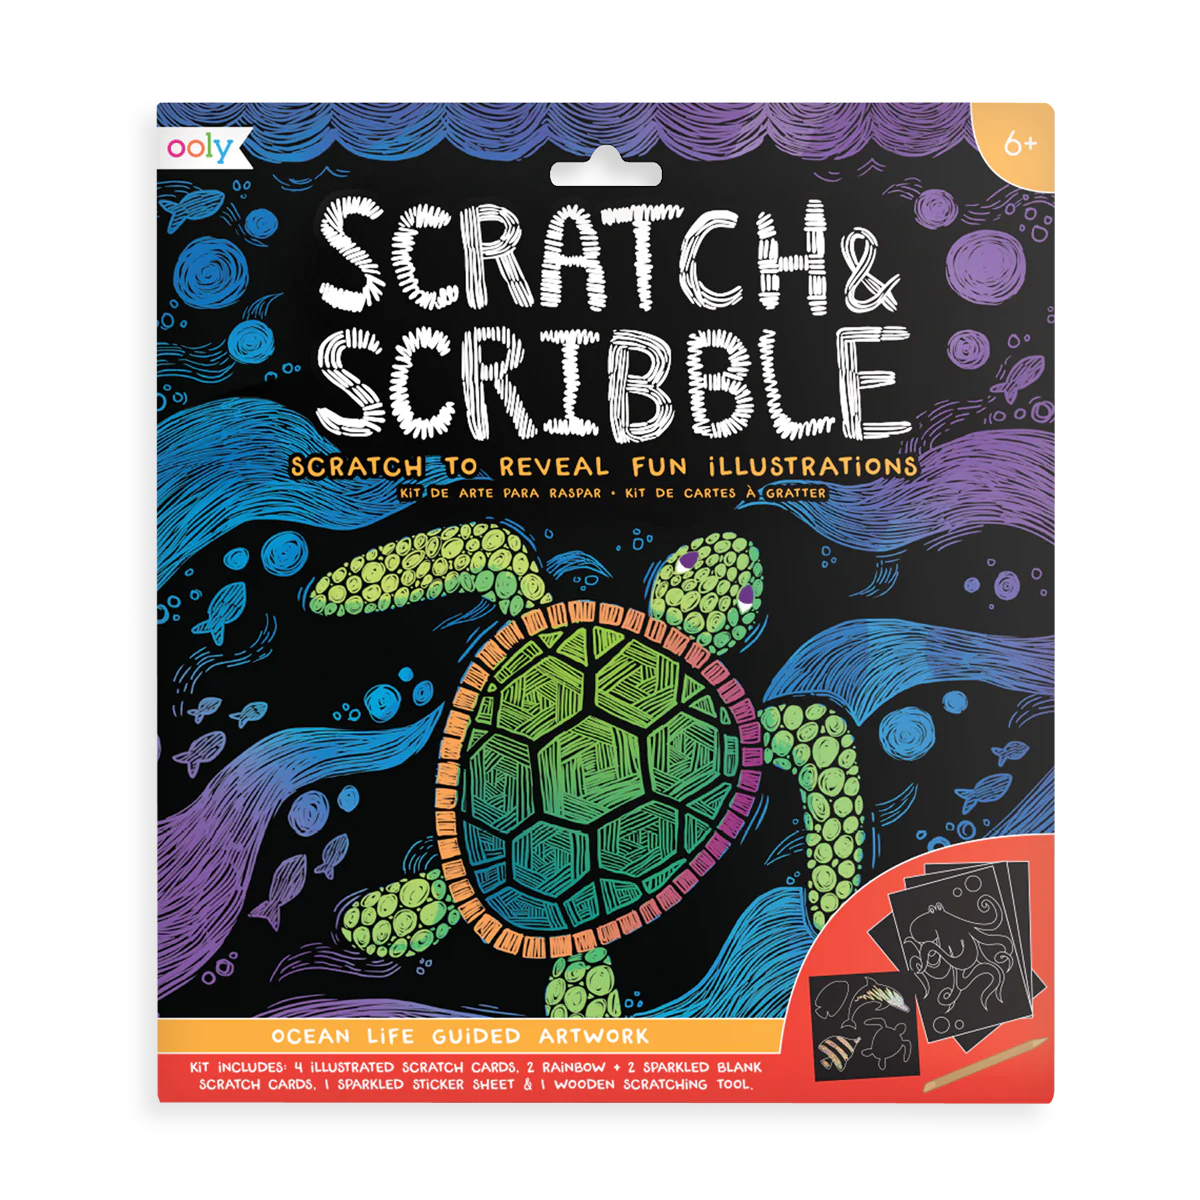 Ooly Scratch and Scribble Art Kit - 5 options